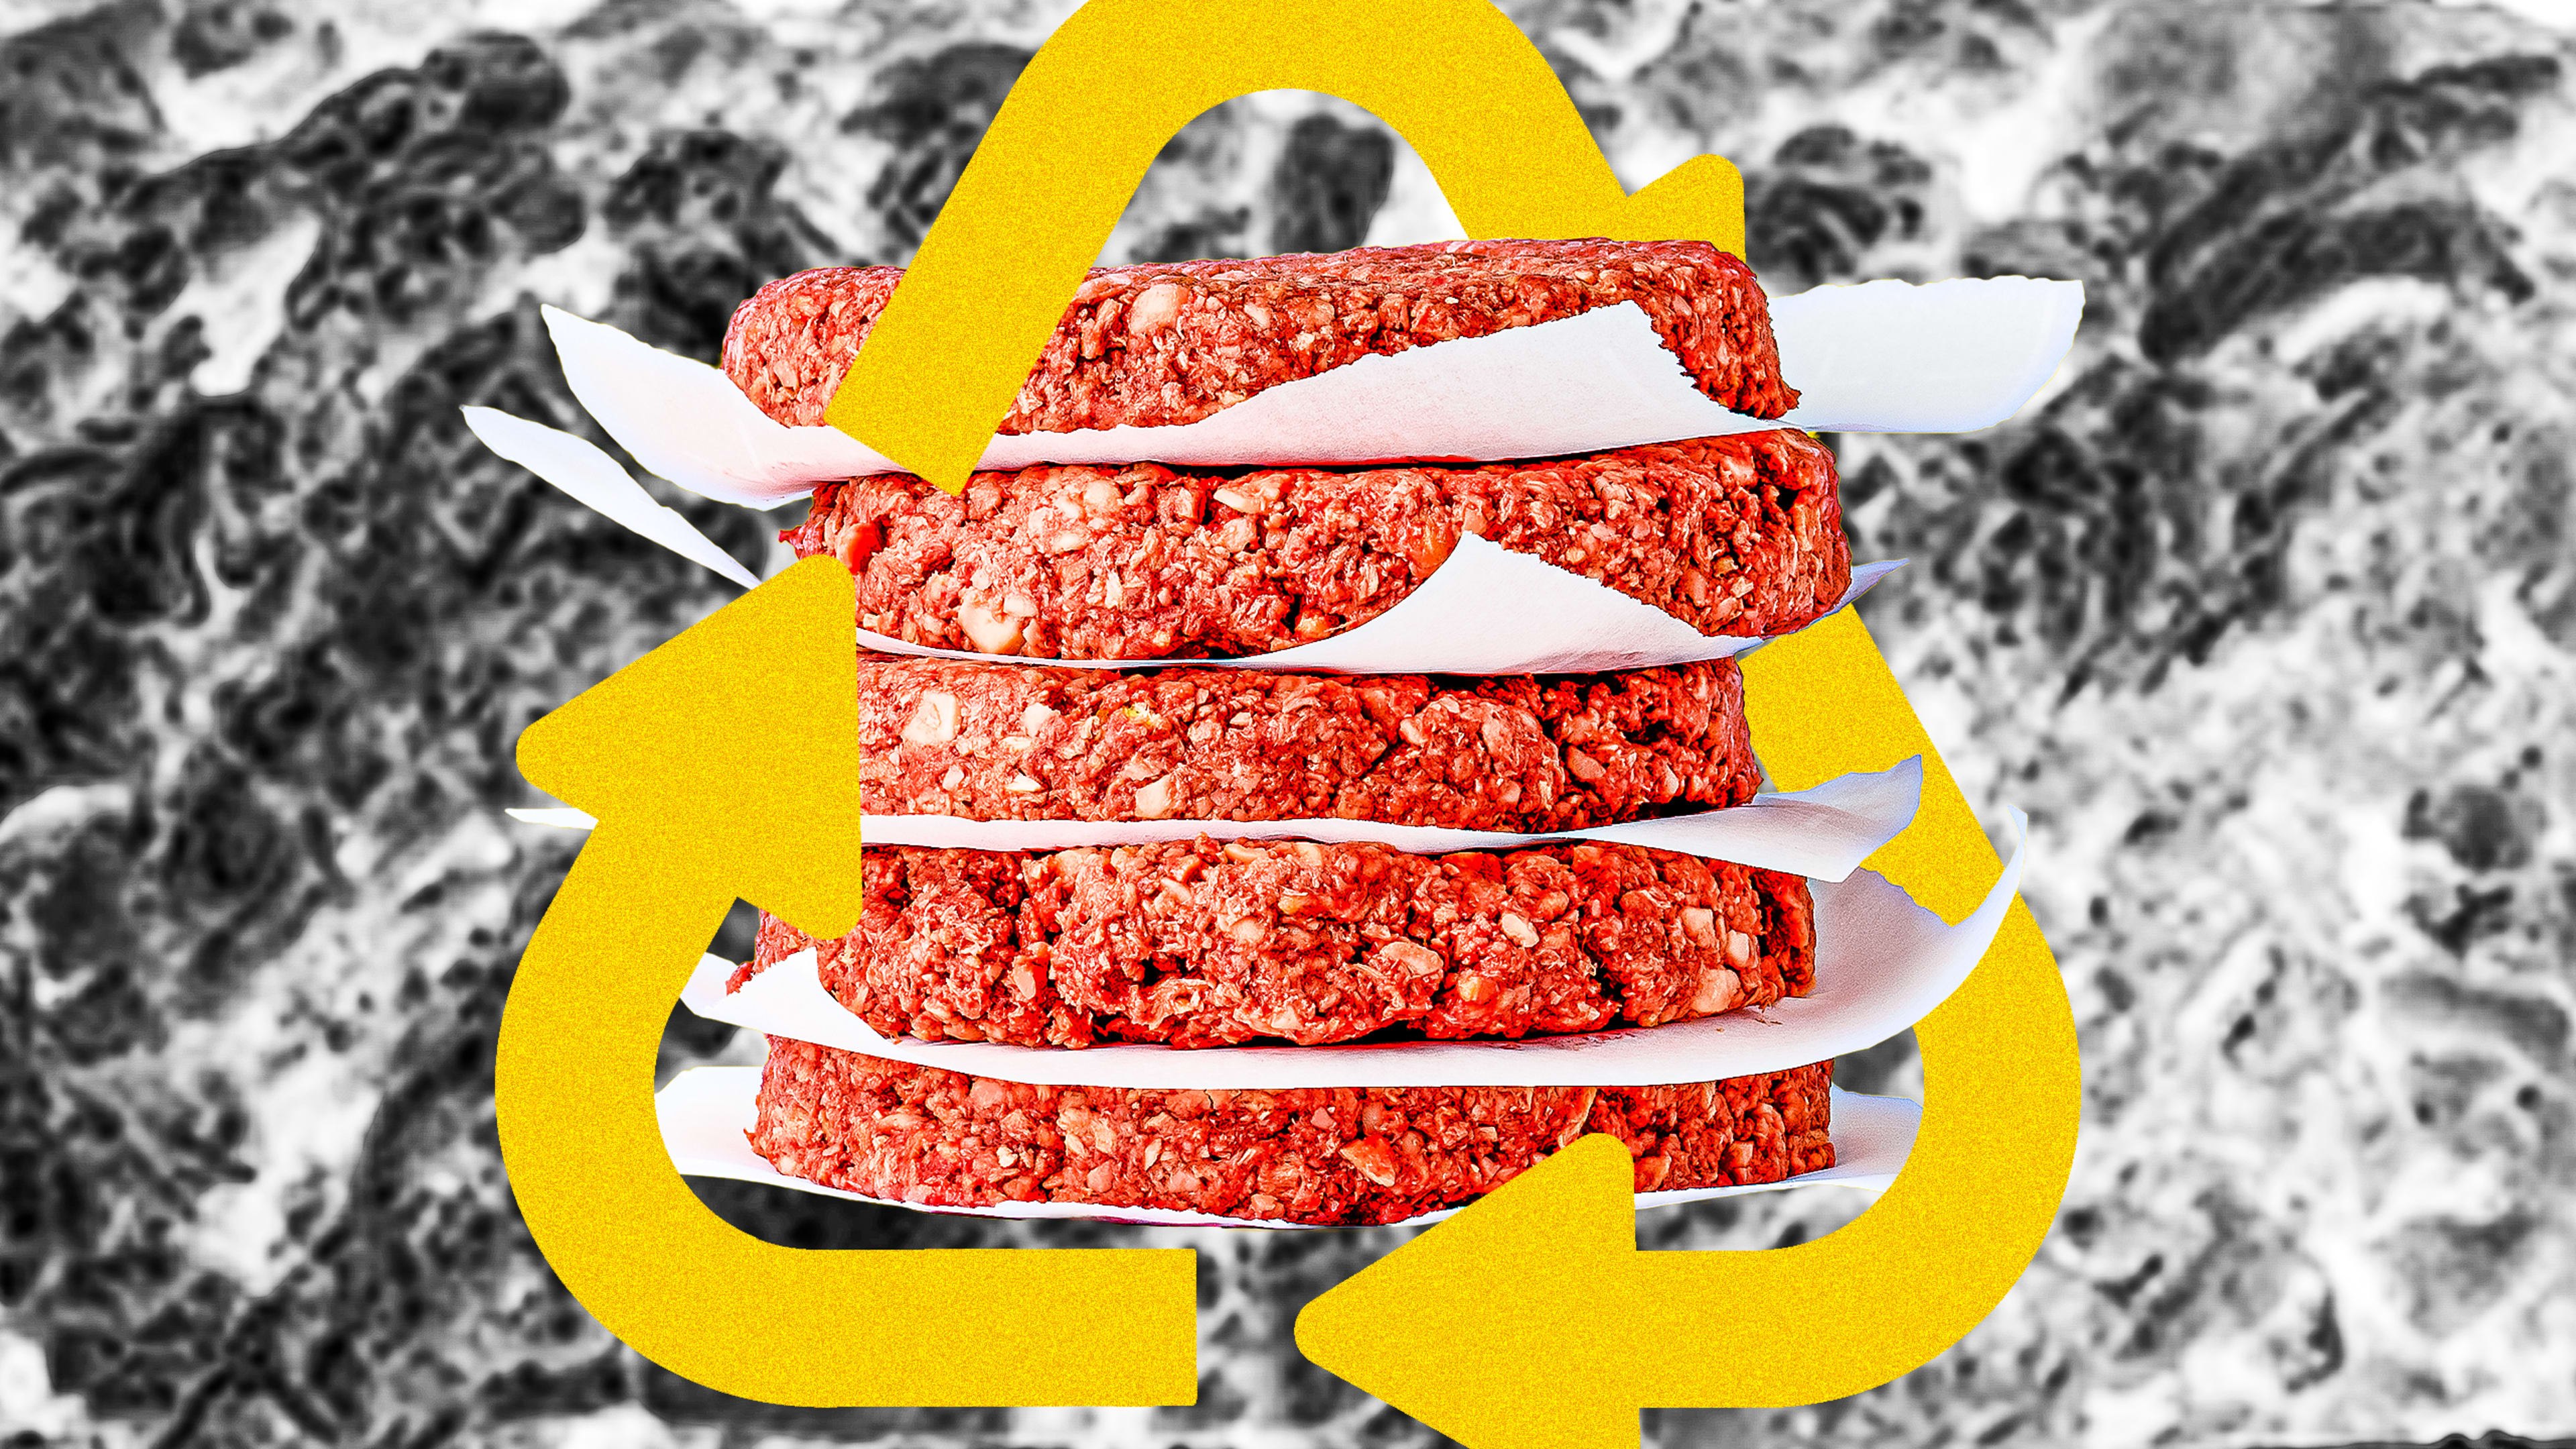 A fad or the future? With plant-based meat, there’s plenty to be bullish about